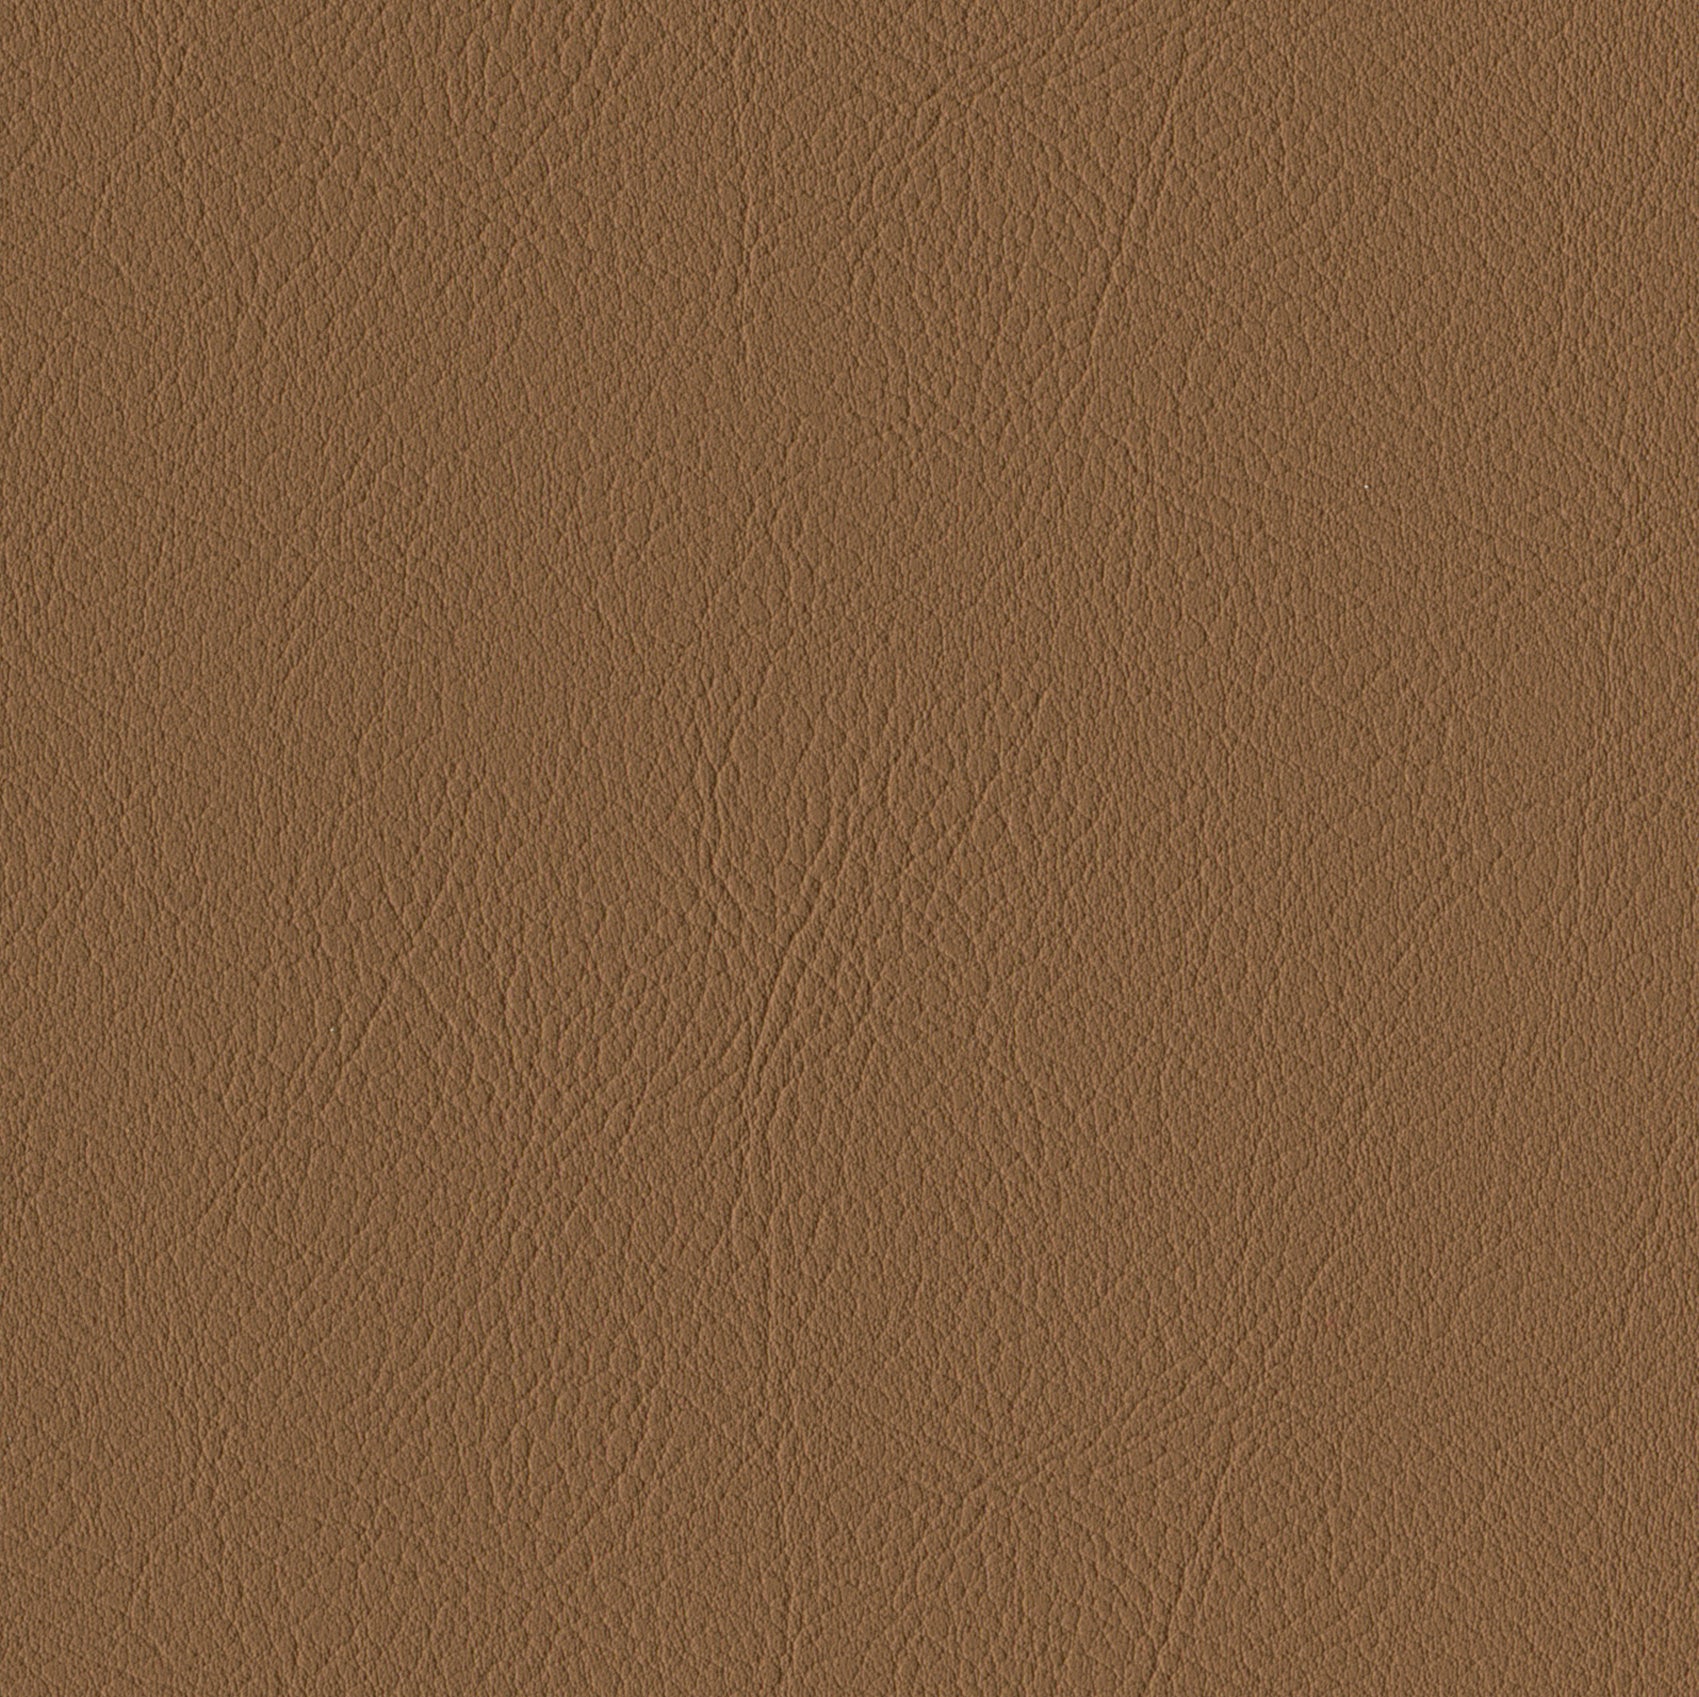    Andriali-Contract-Vinyl_Upholstery-Design-LegacyFR-Color-321AntiquarianBrown-Width-140cm